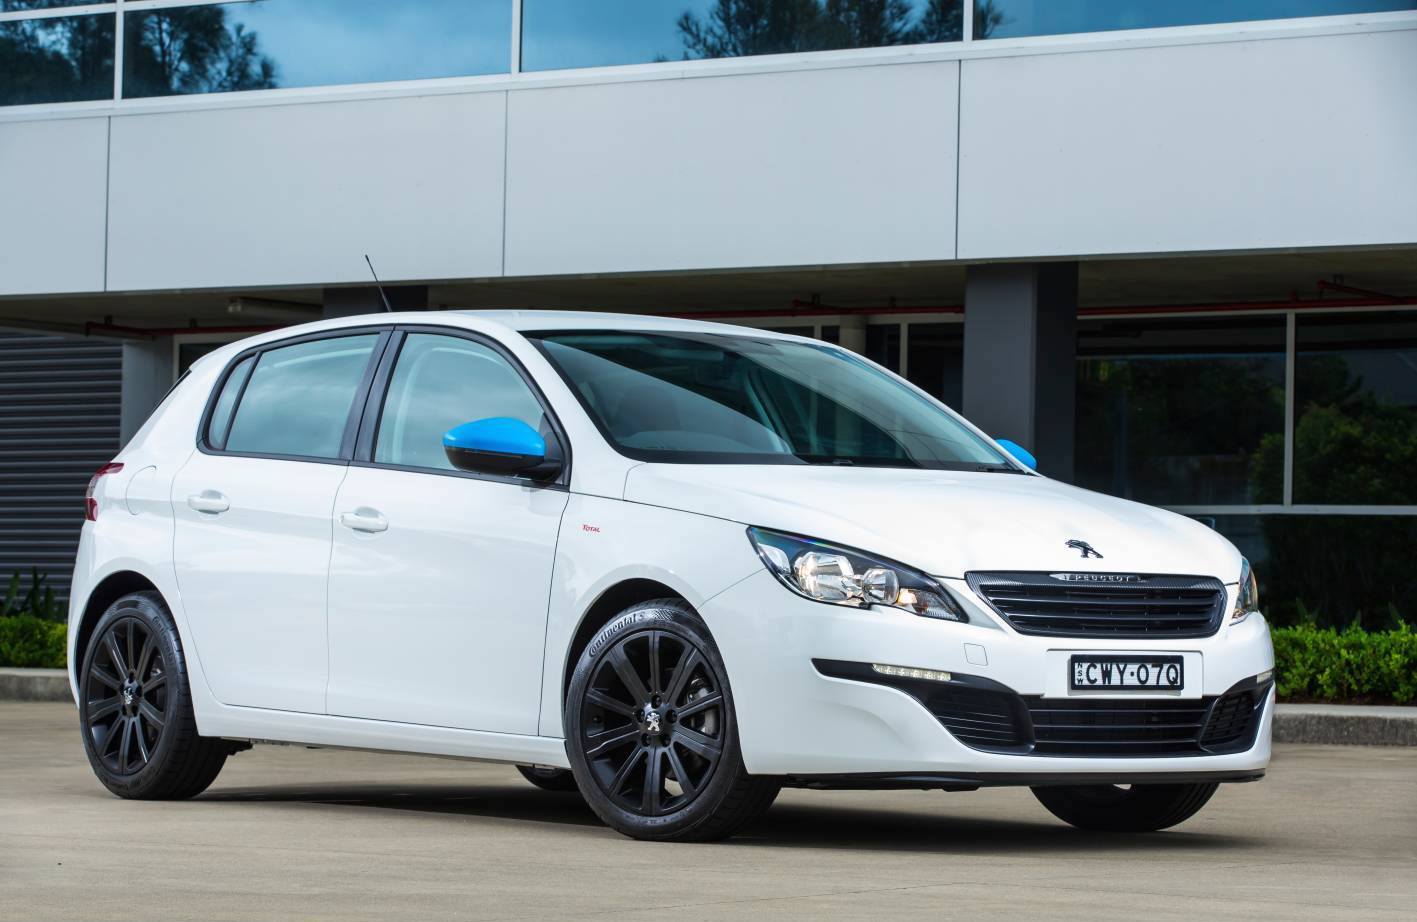 Peugeot 308 Total Package special edition on sale in Australia